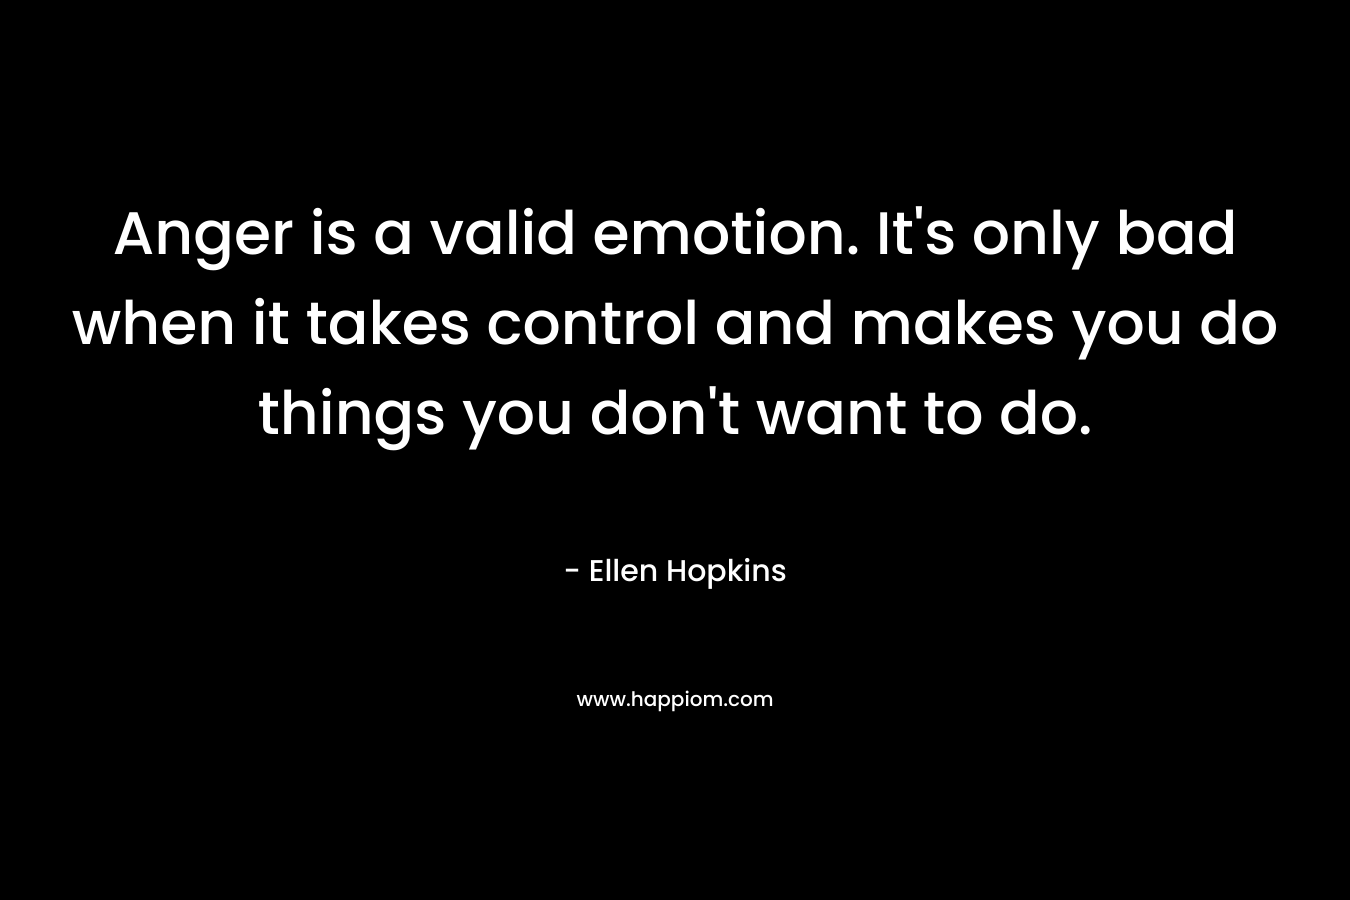 Anger is a valid emotion. It’s only bad when it takes control and makes you do things you don’t want to do. – Ellen Hopkins